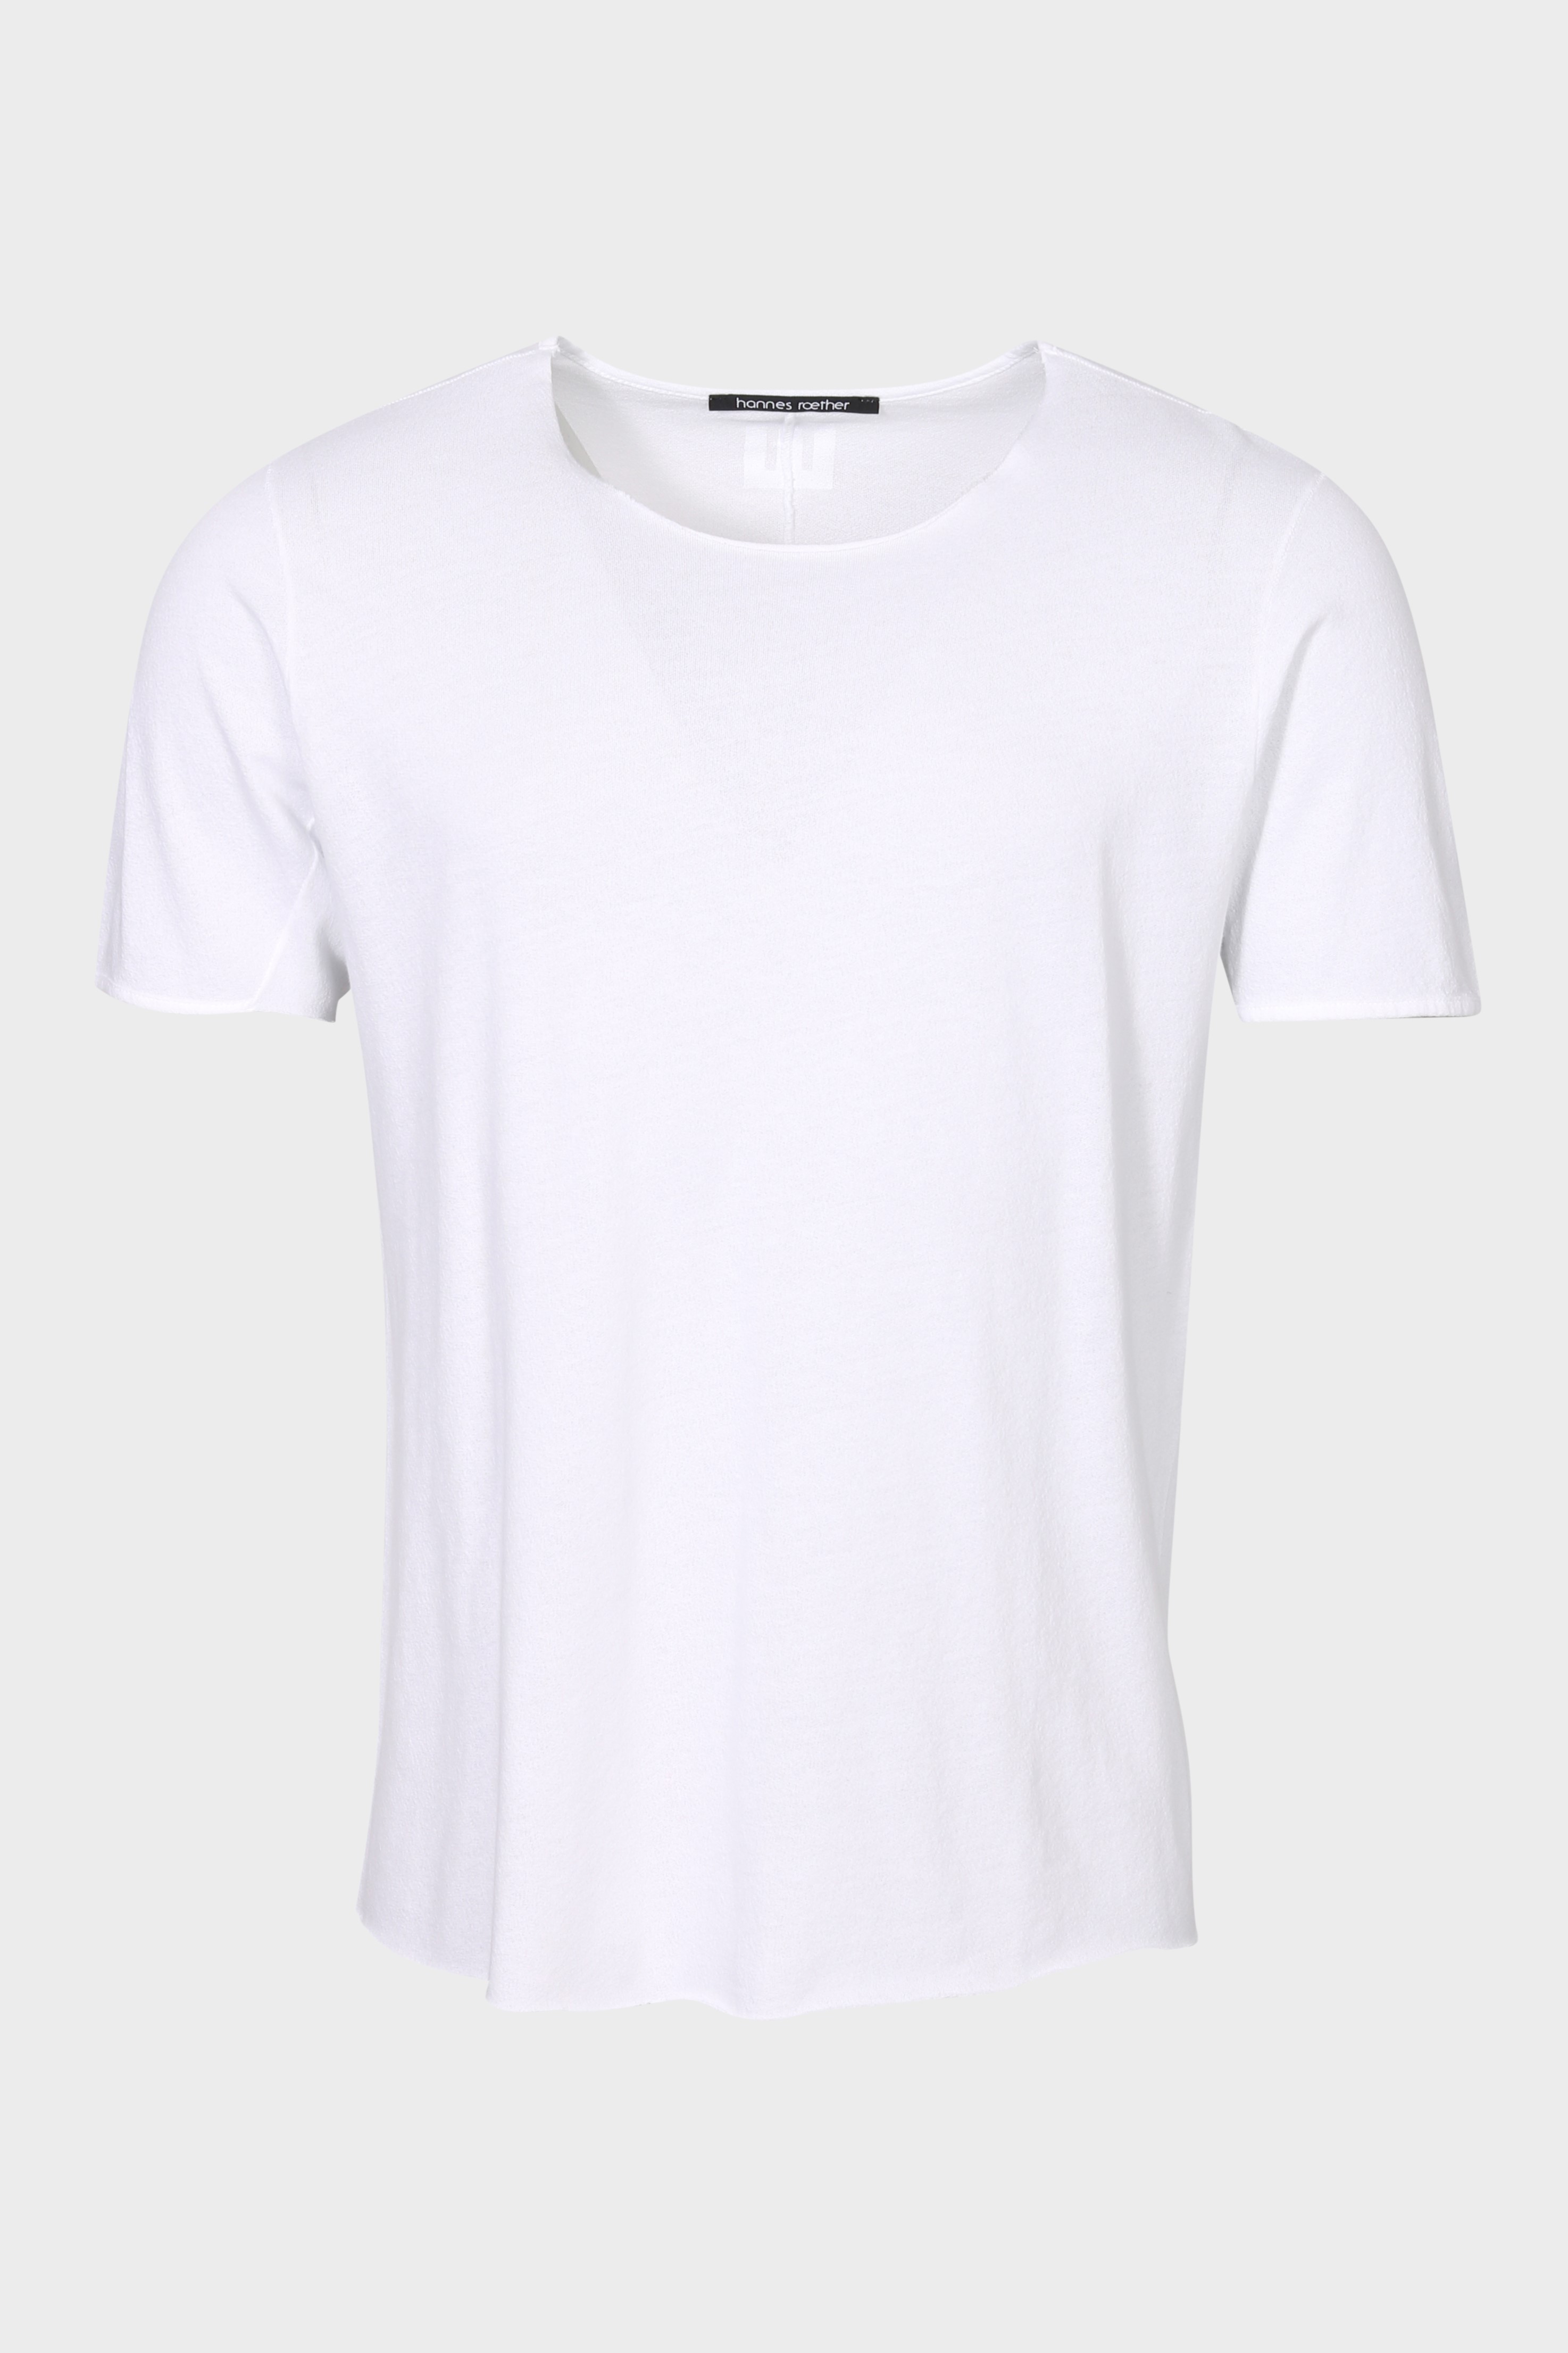 HANNES ROETHER T-Shirt in White L